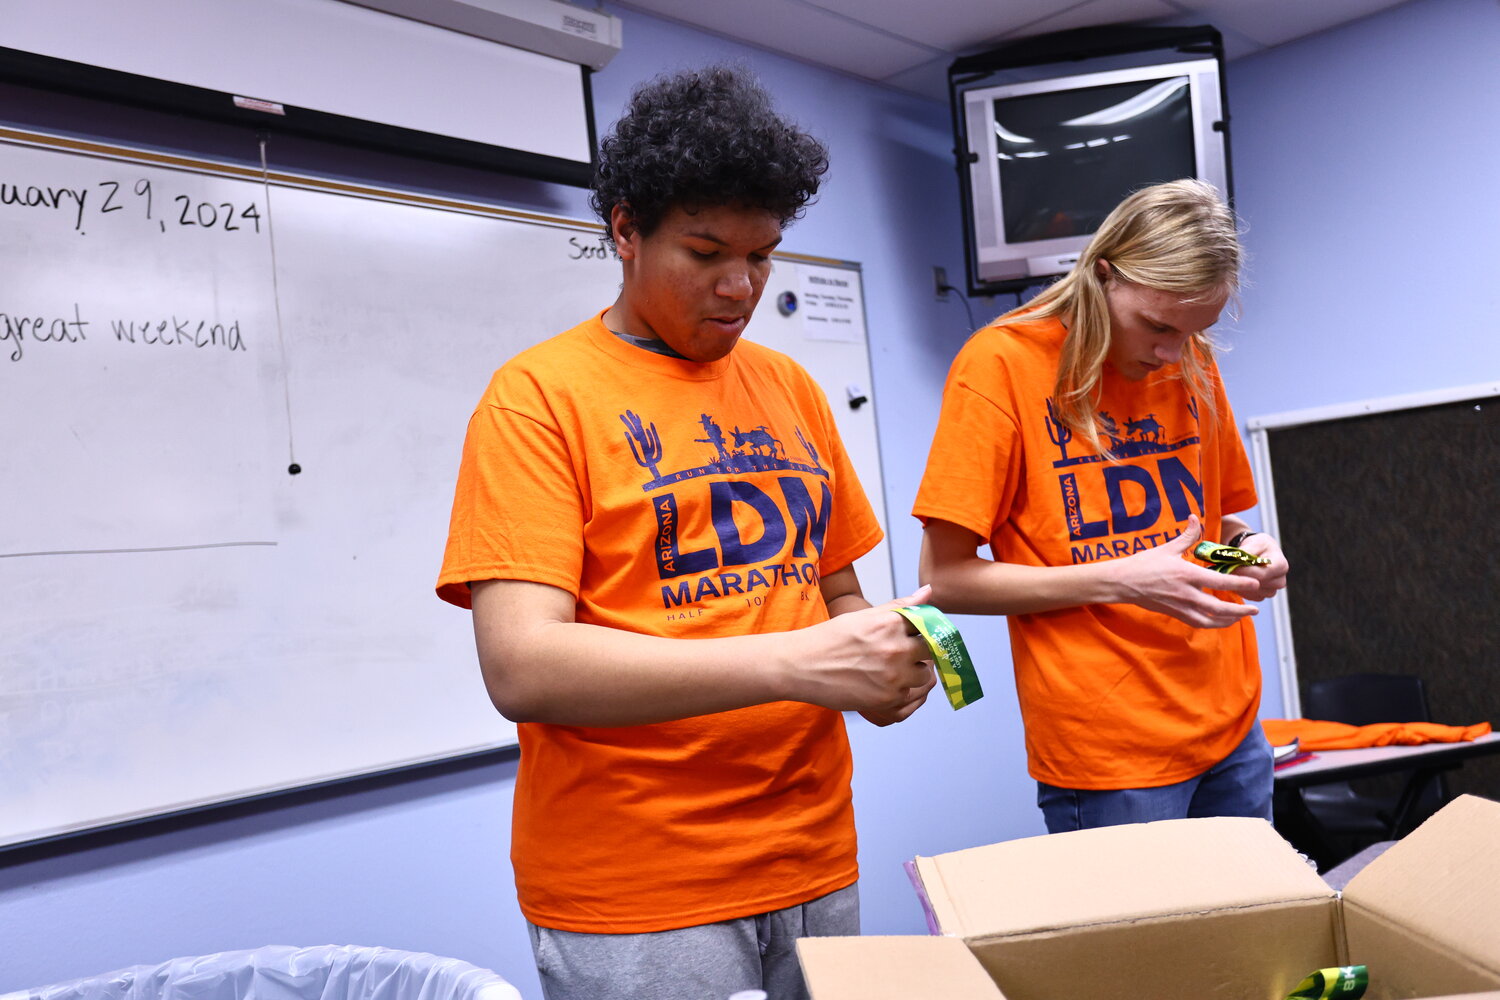 This year, as in previous years, the students took on the responsibility of unpacking medals for the Lost Dutchman Marathon scheduled for Feb. 18.